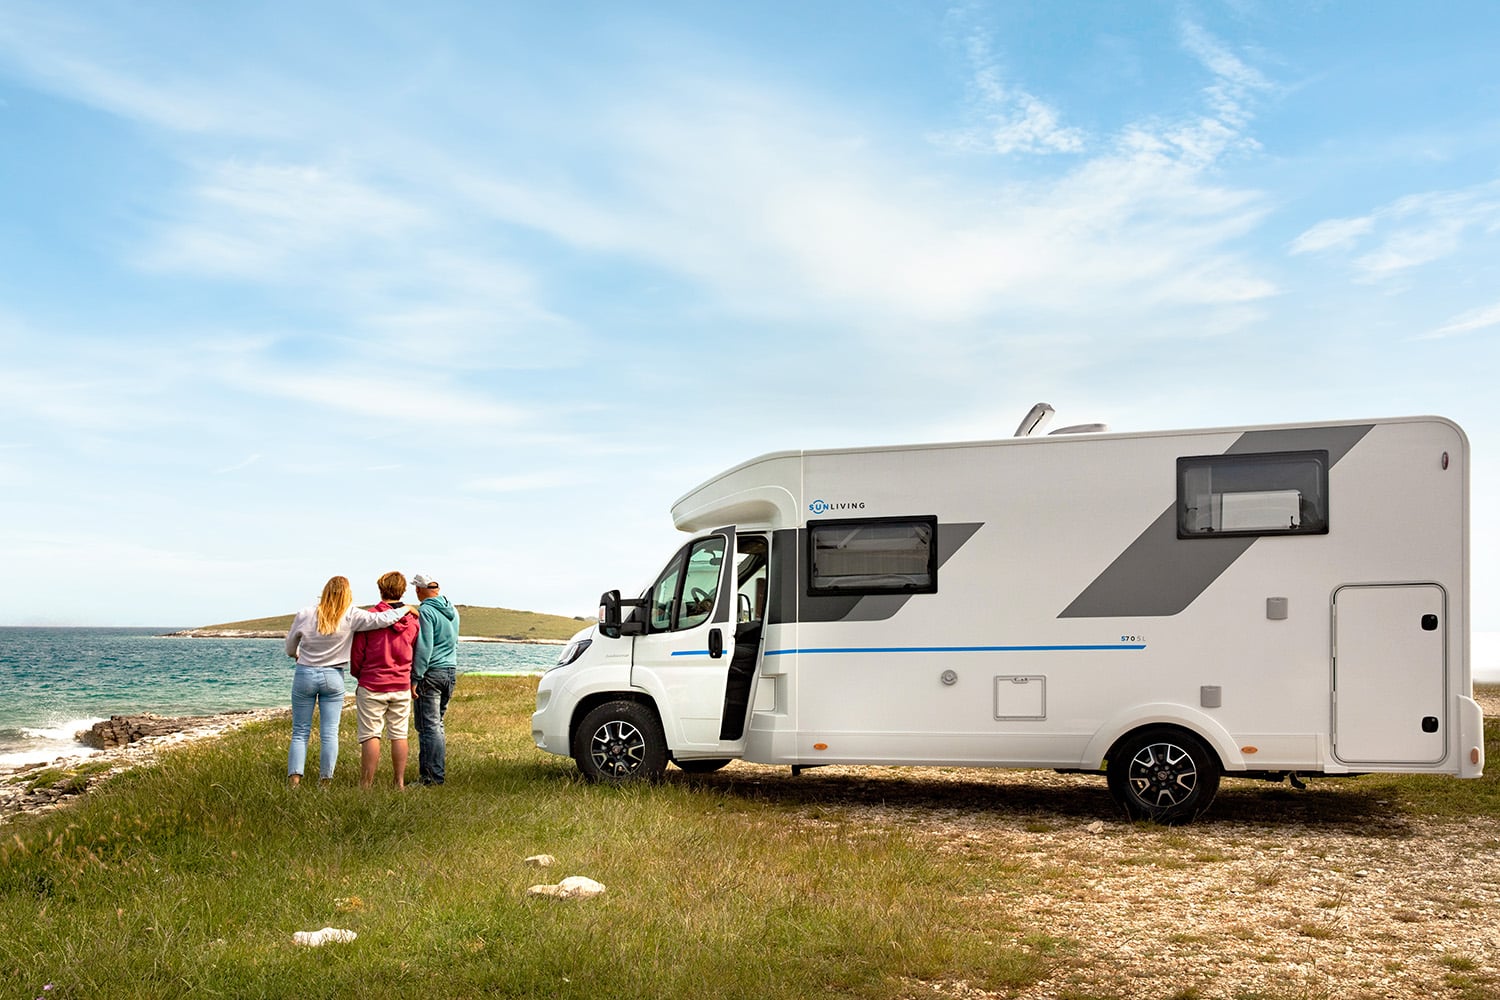 Motorhome protection: CamperSecure Connected